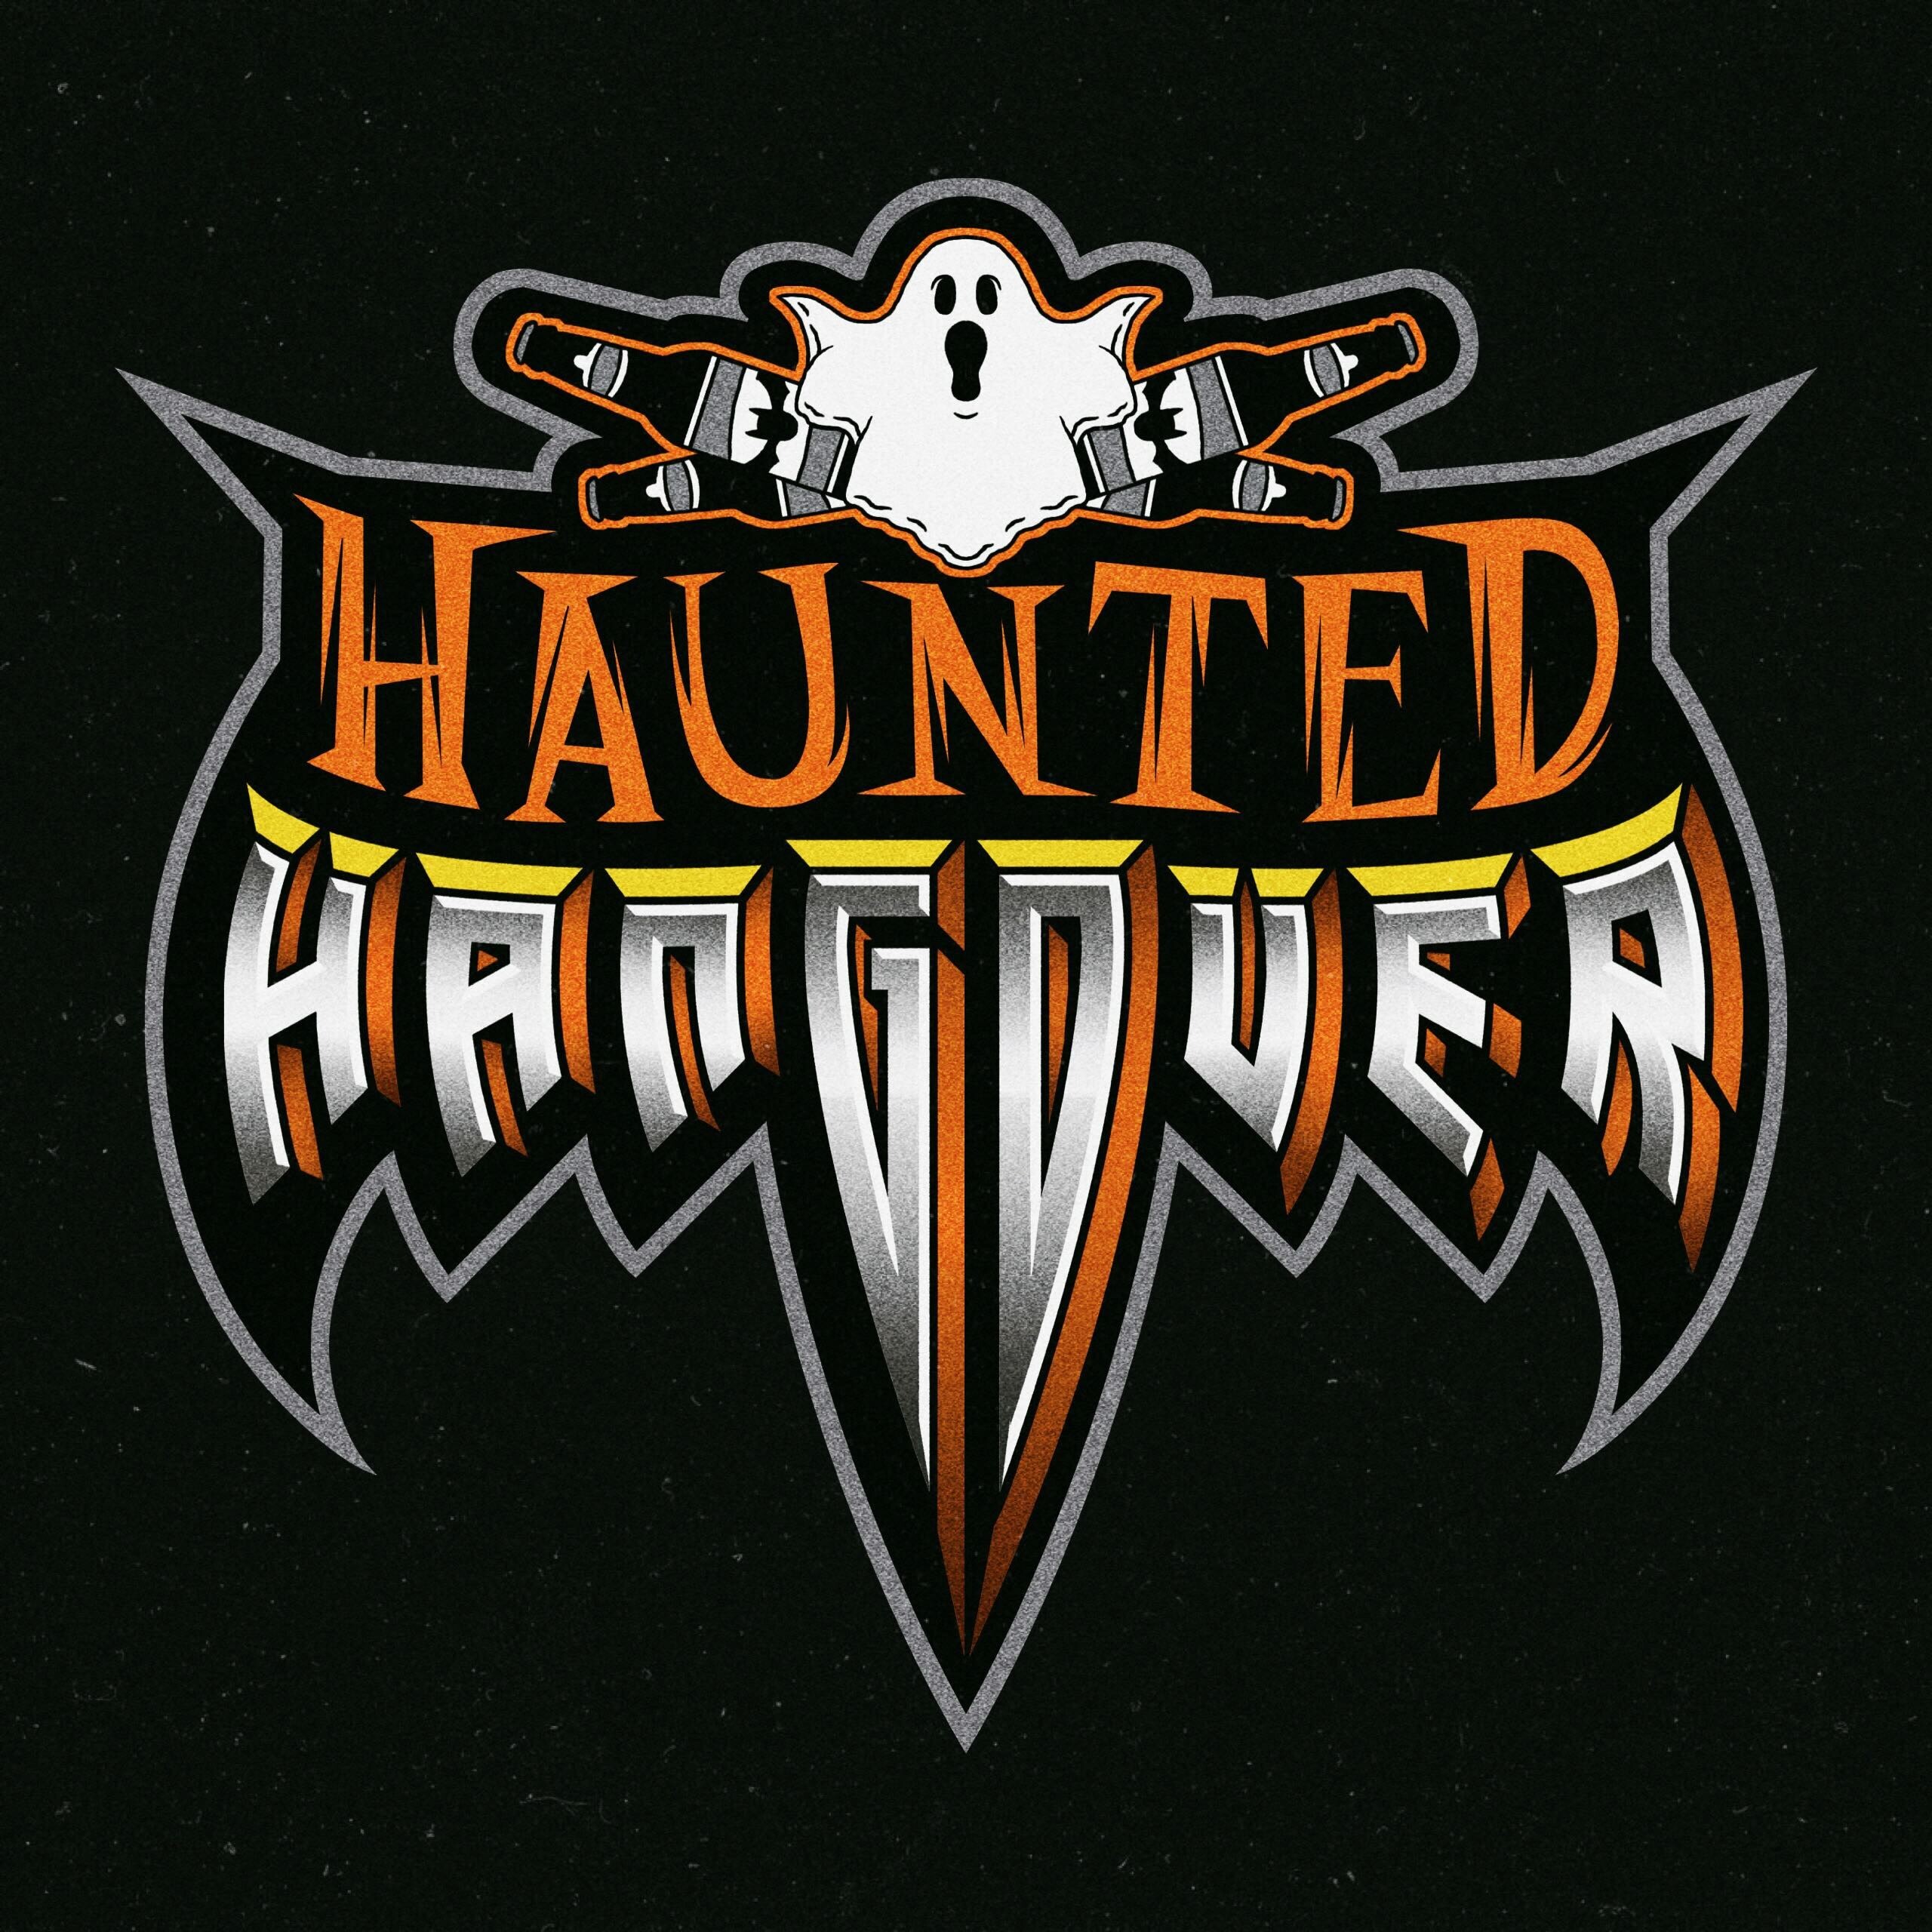 Haunted Hangover Podcast